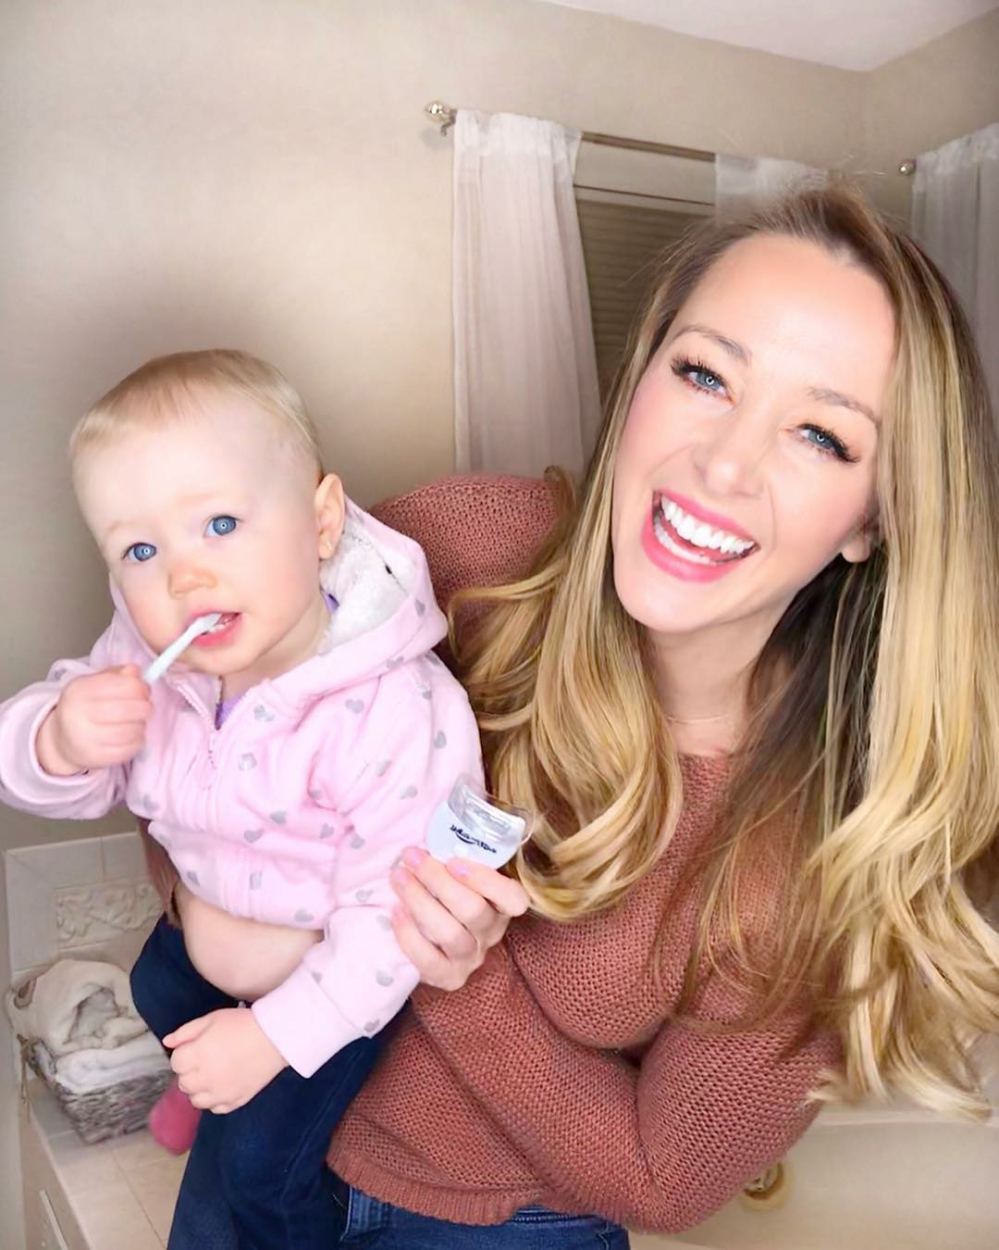 Jamie Otis Gets Real About 18-Month-Old Daughter Pooping in the Bathtub: ‘I Cannot Believe This Just Happened’